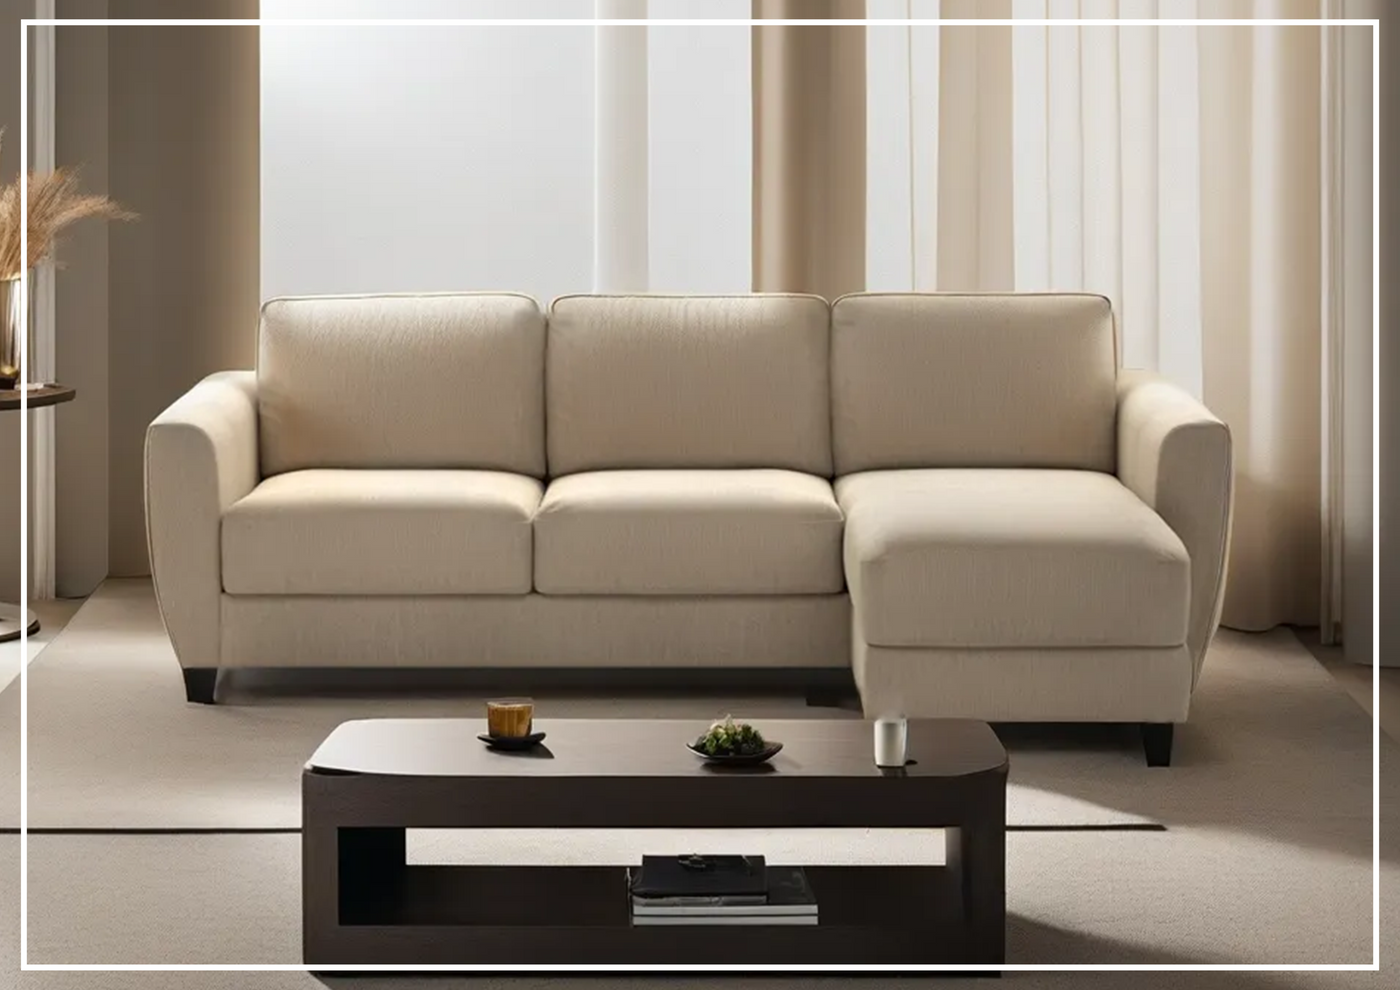 Luonto Flex Sectional Sofa Sleeper With Openable Chaise & Storage